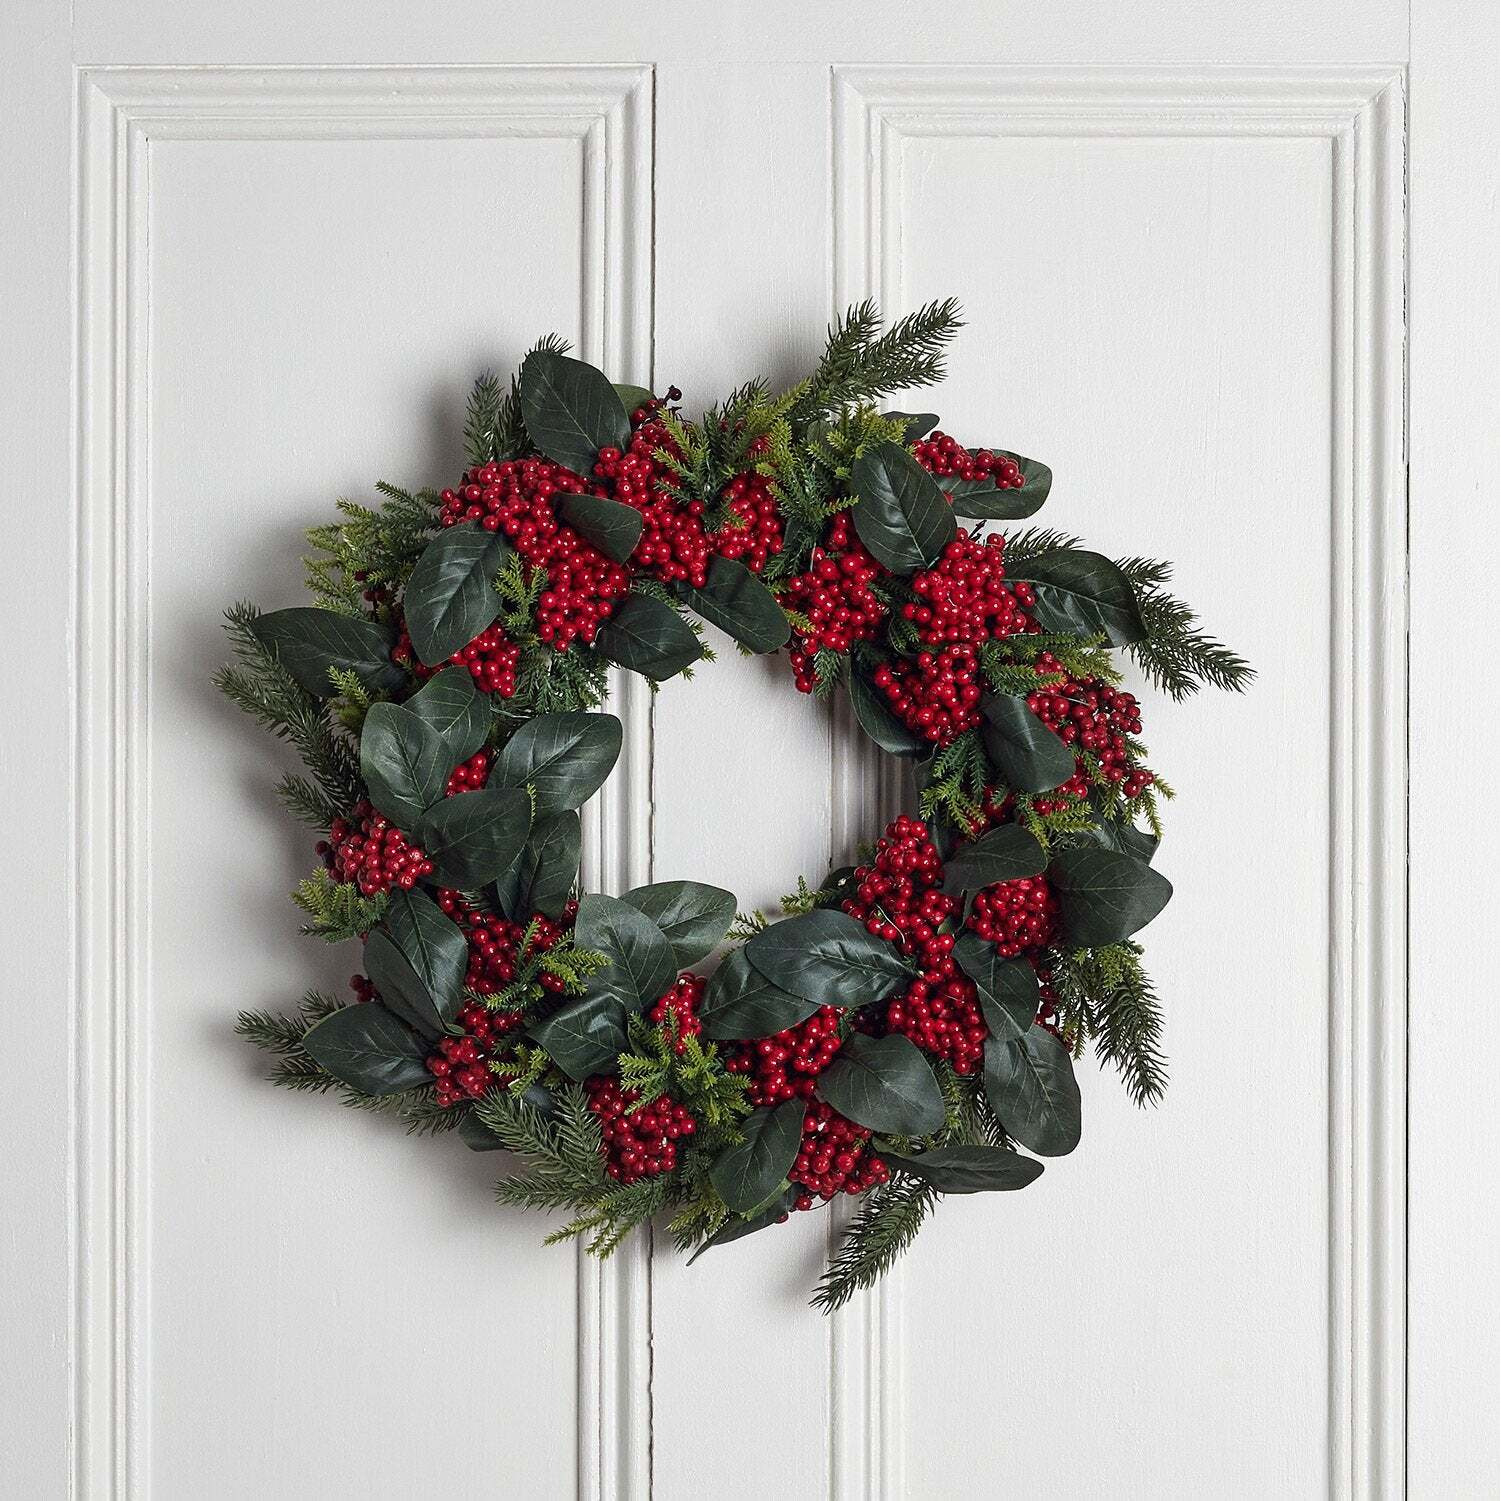 50cm Red Berry Wreath - image 1